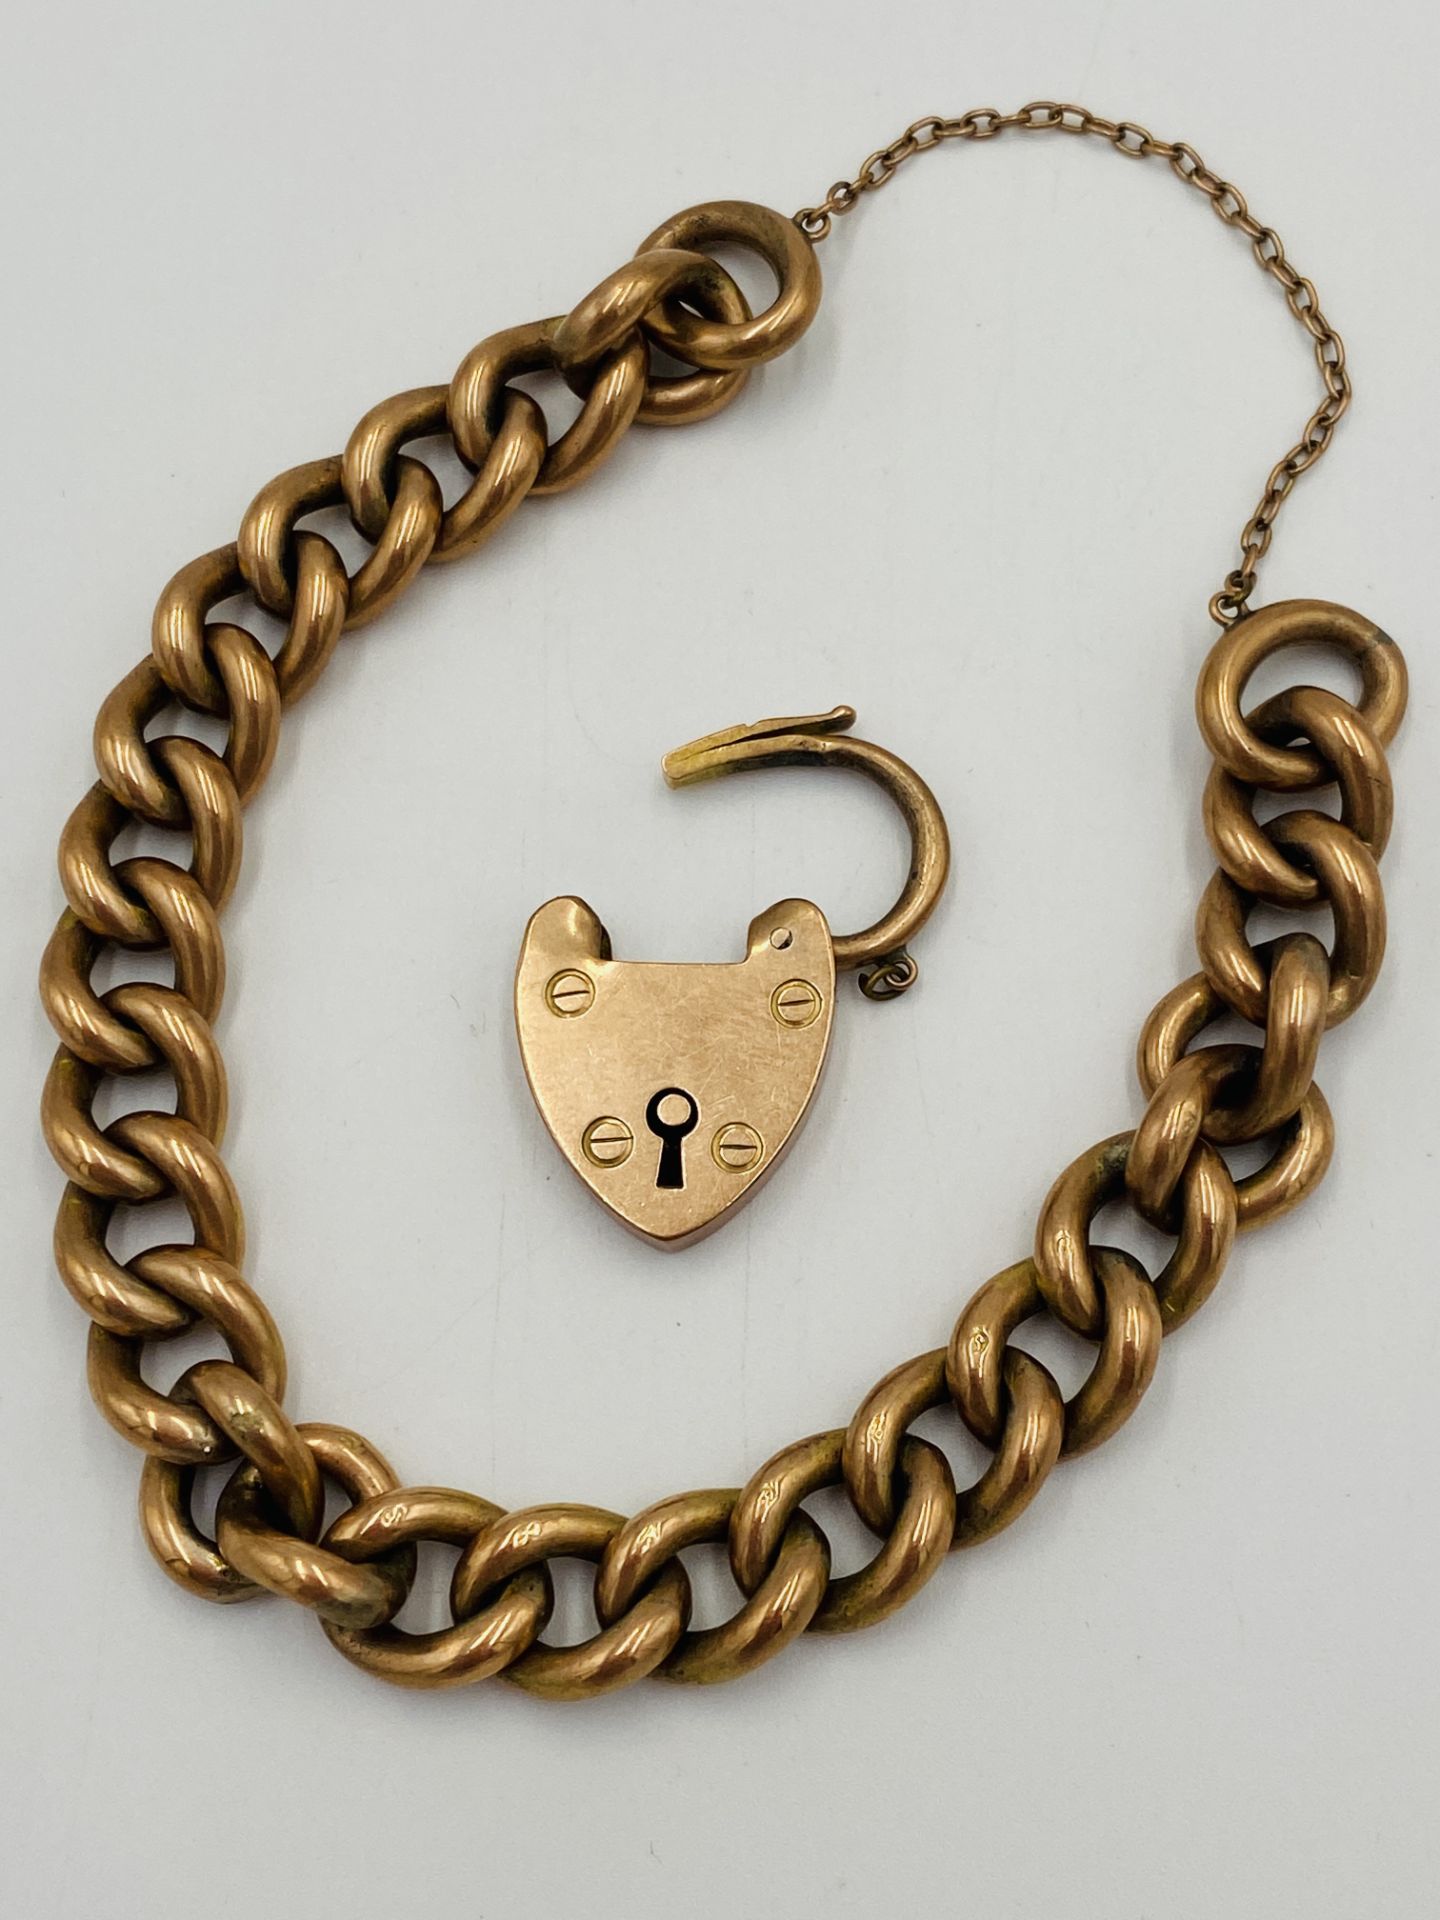 9ct gold bracelet with 9ct gold padlock charm - Image 3 of 4